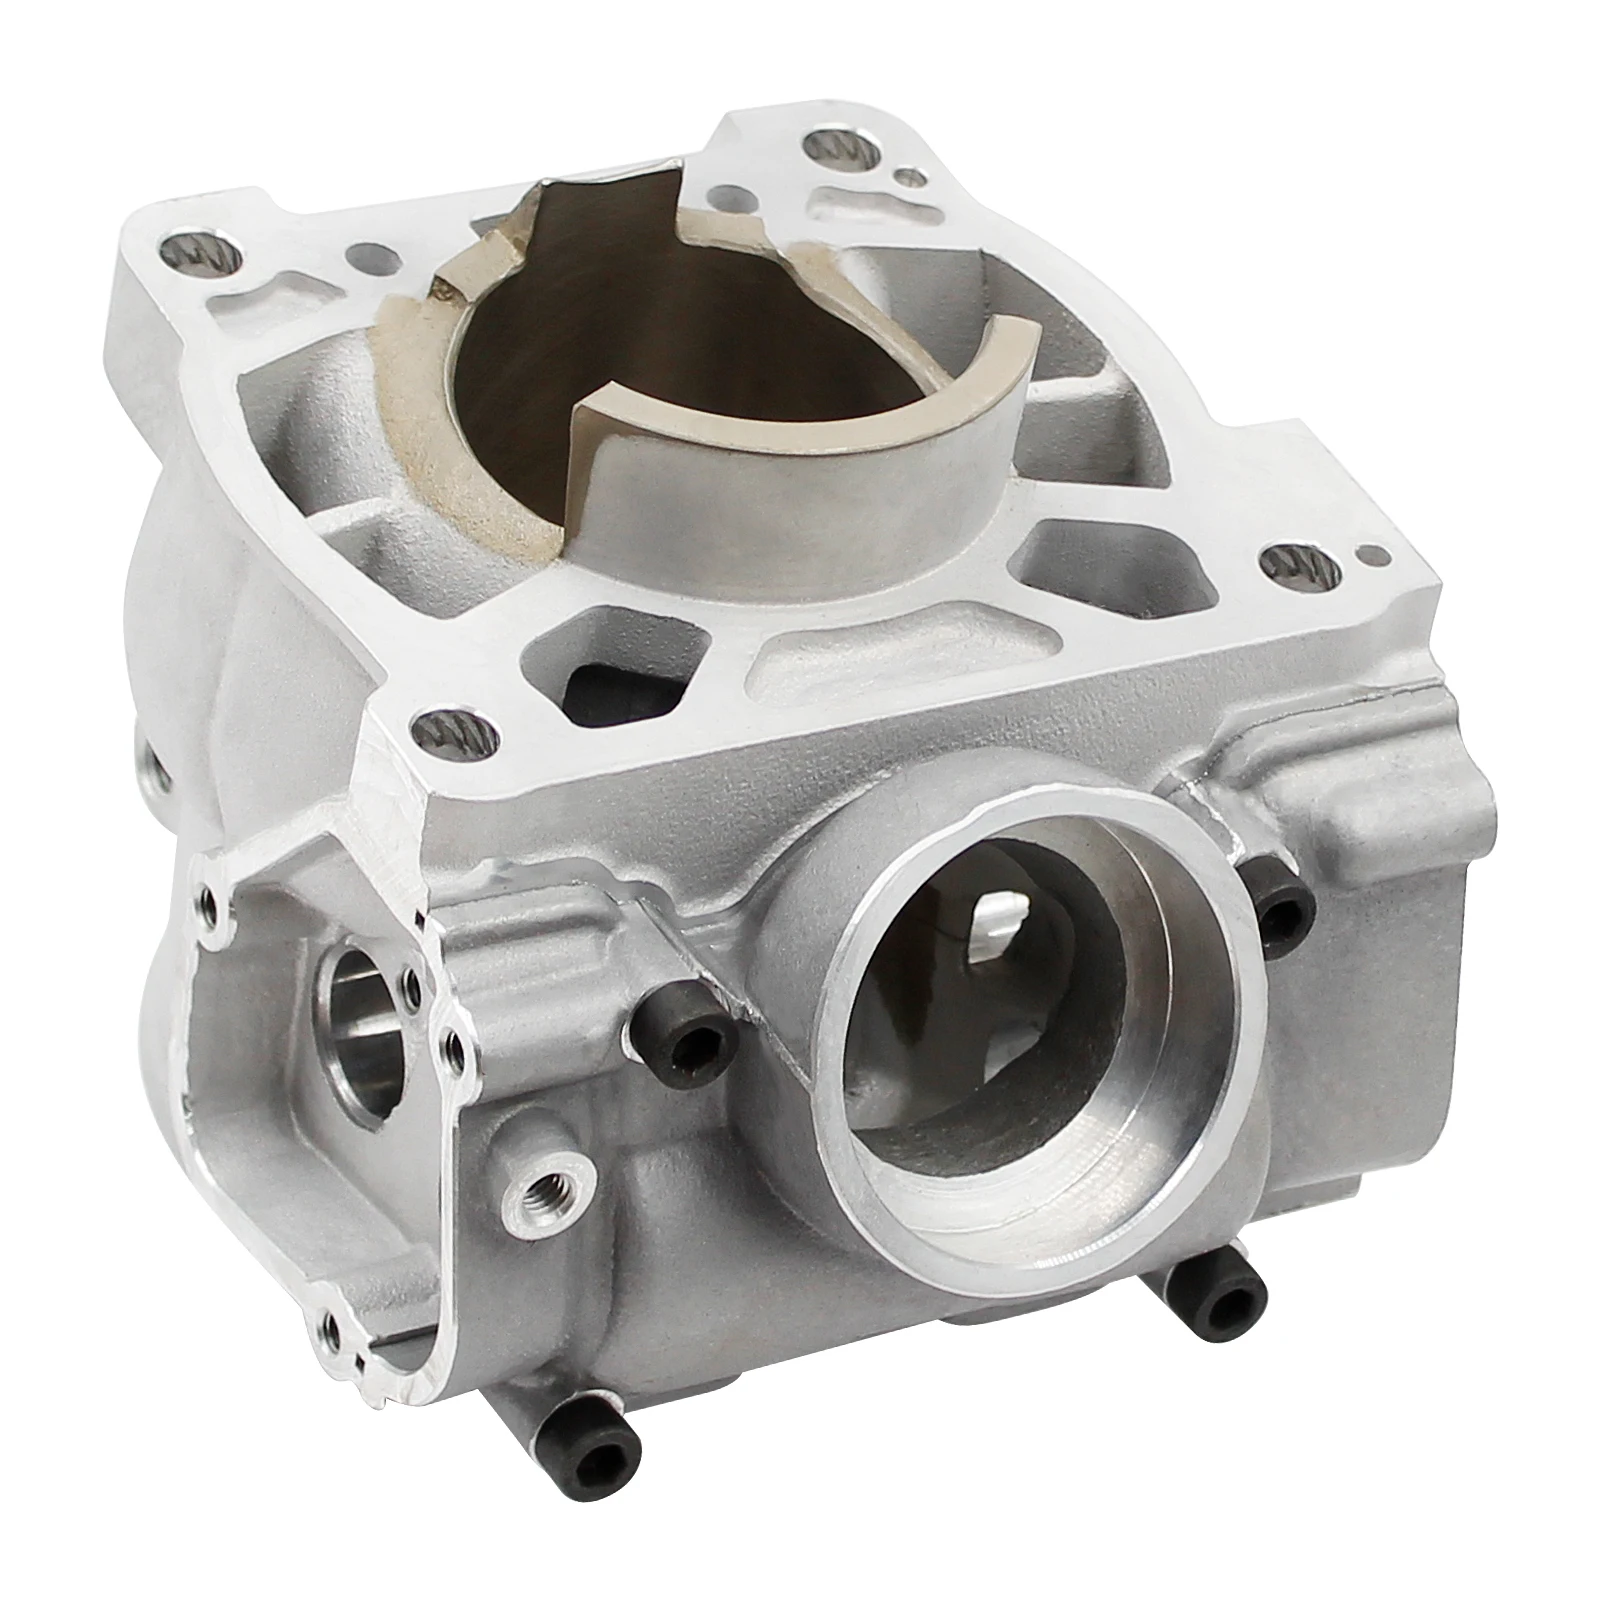 

STD 95mm Motorcycle Engine Assembly Cylinder Block for KIM 125 SX 2016-2018 125 XC-W 2017-2018